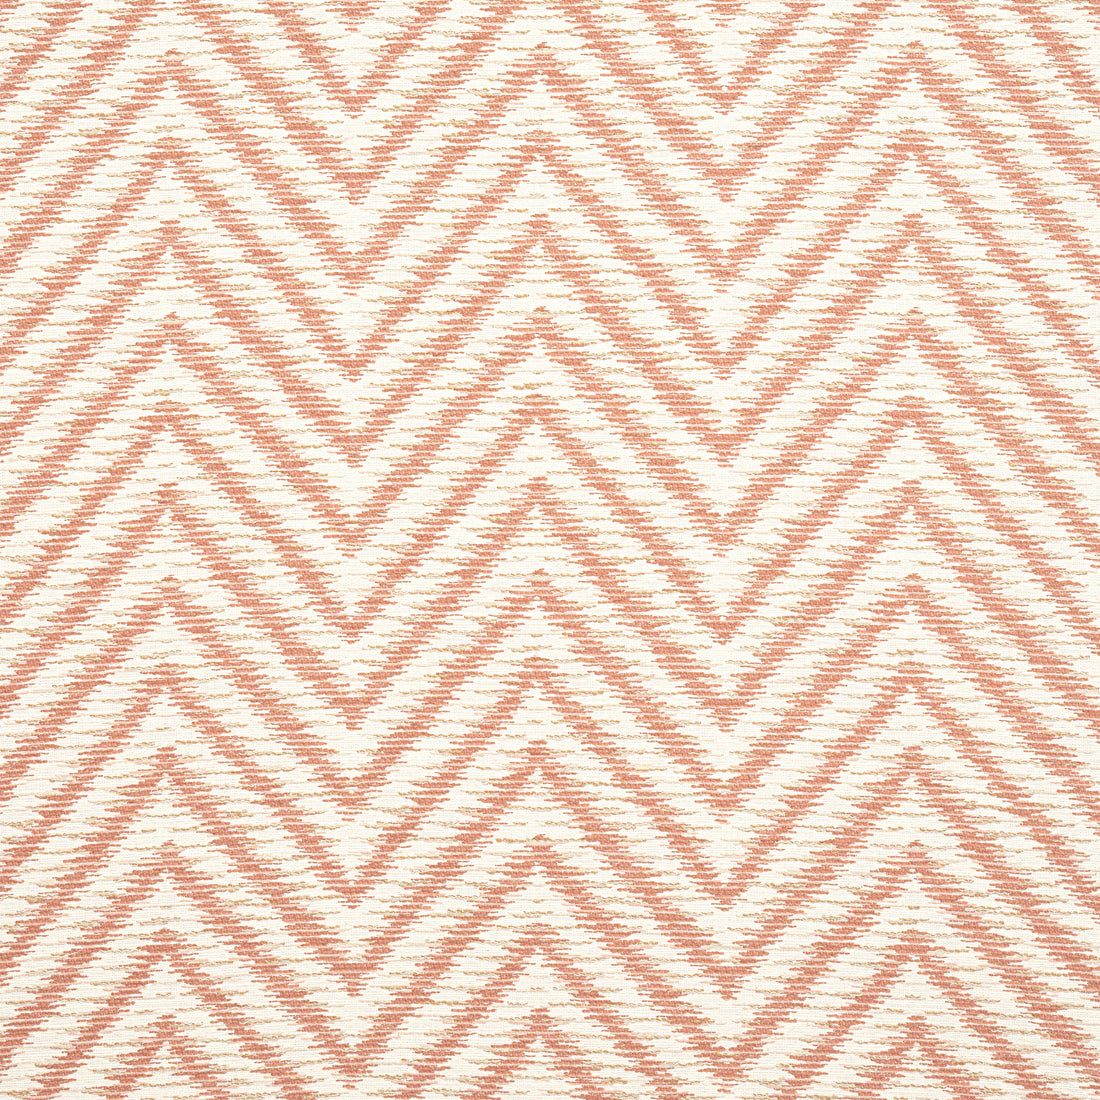 Aliso fabric in clay color - pattern number W8816 - by Thibaut in the Haven collection